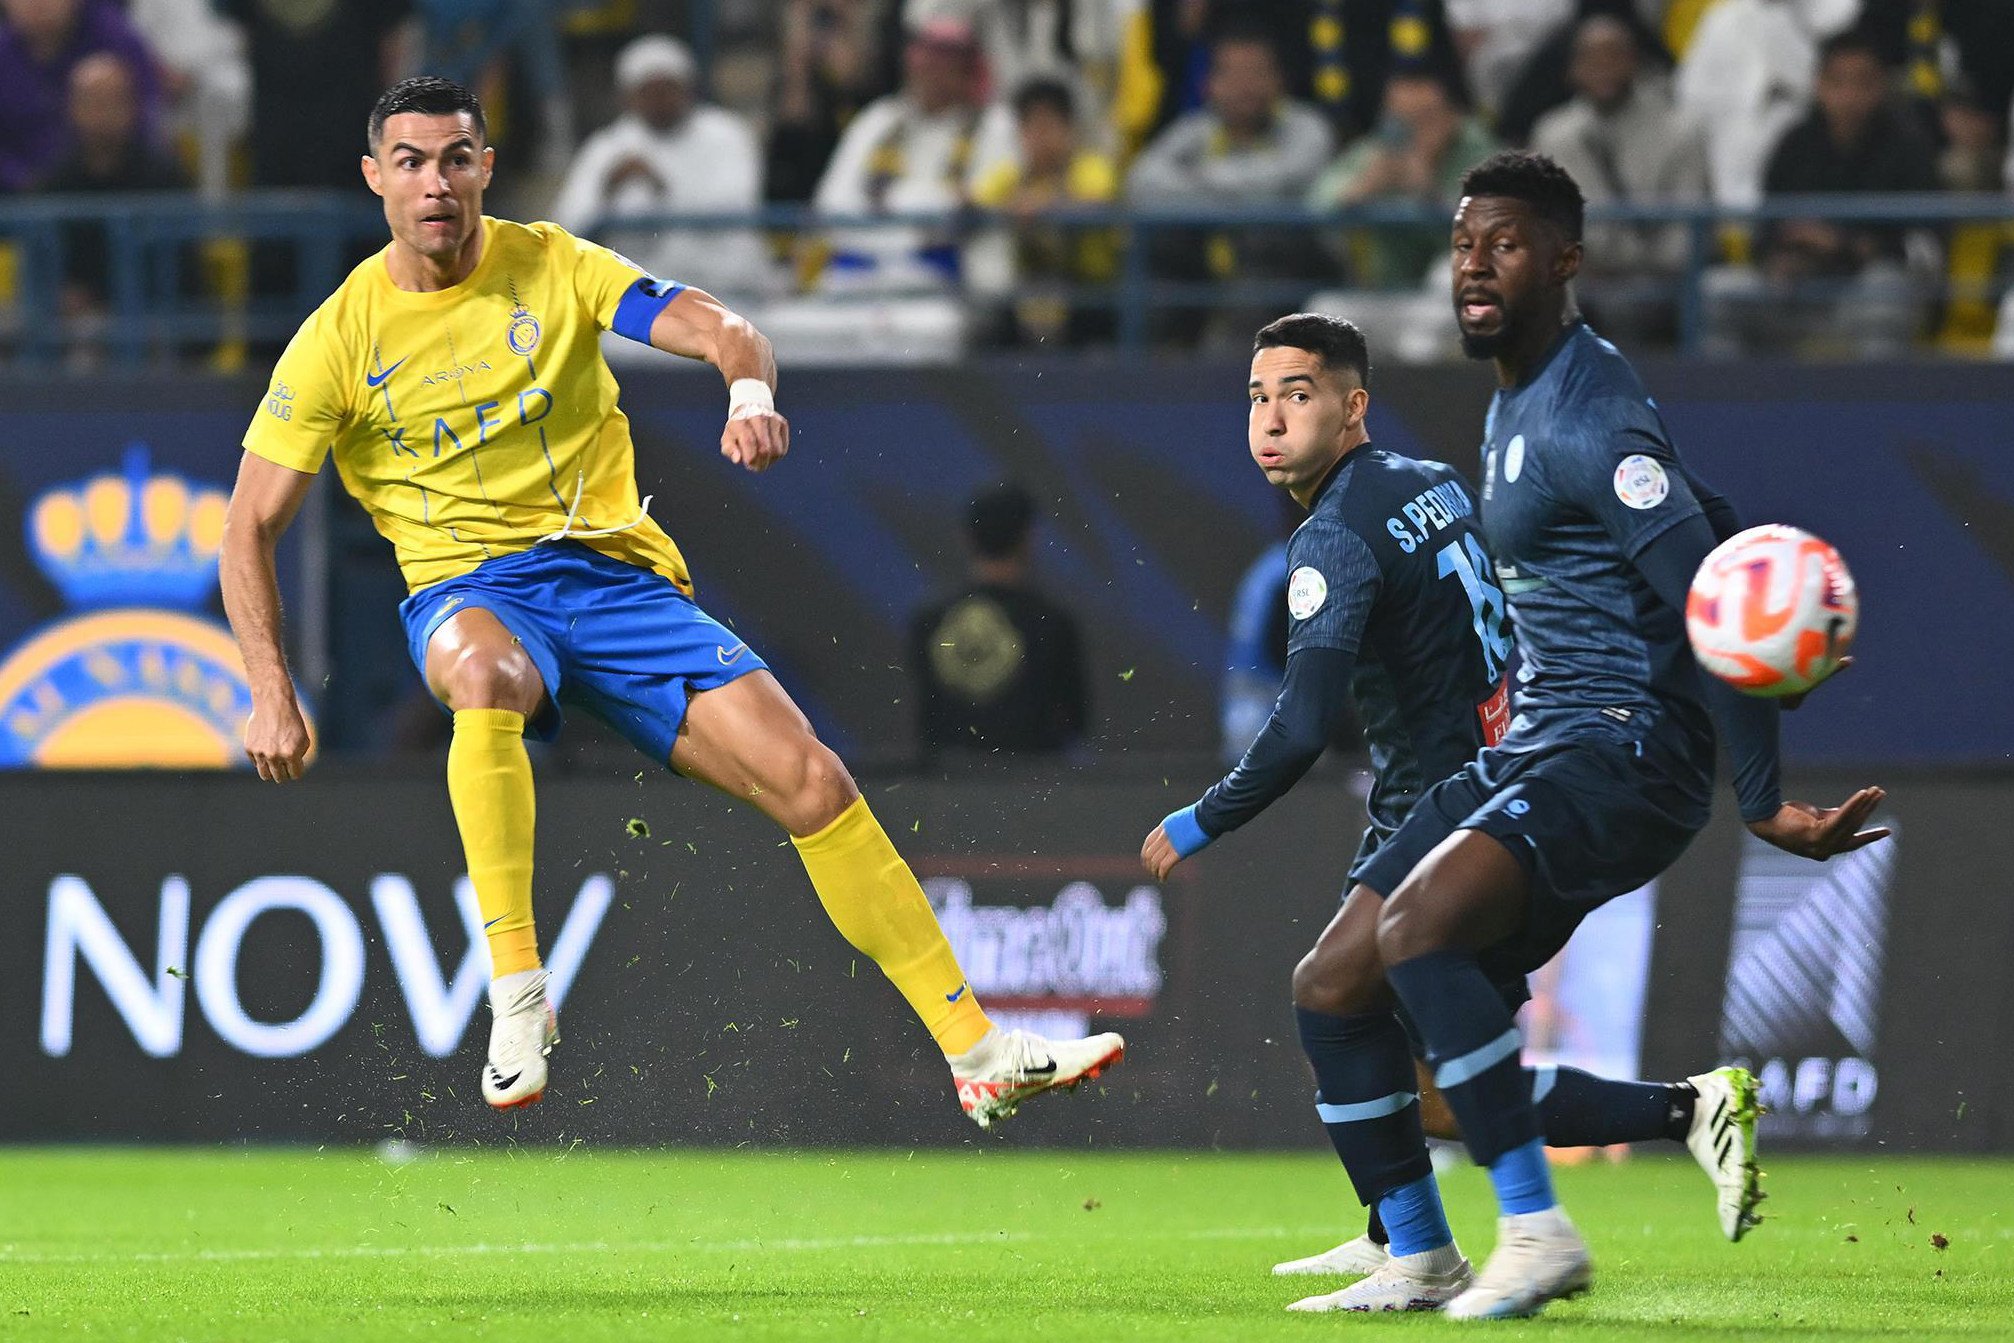 Cristiano Ronaldo has sparkled for Al Nassr, leading Luis Figo to suggest Manchester United should have kept him. Photo: SPA